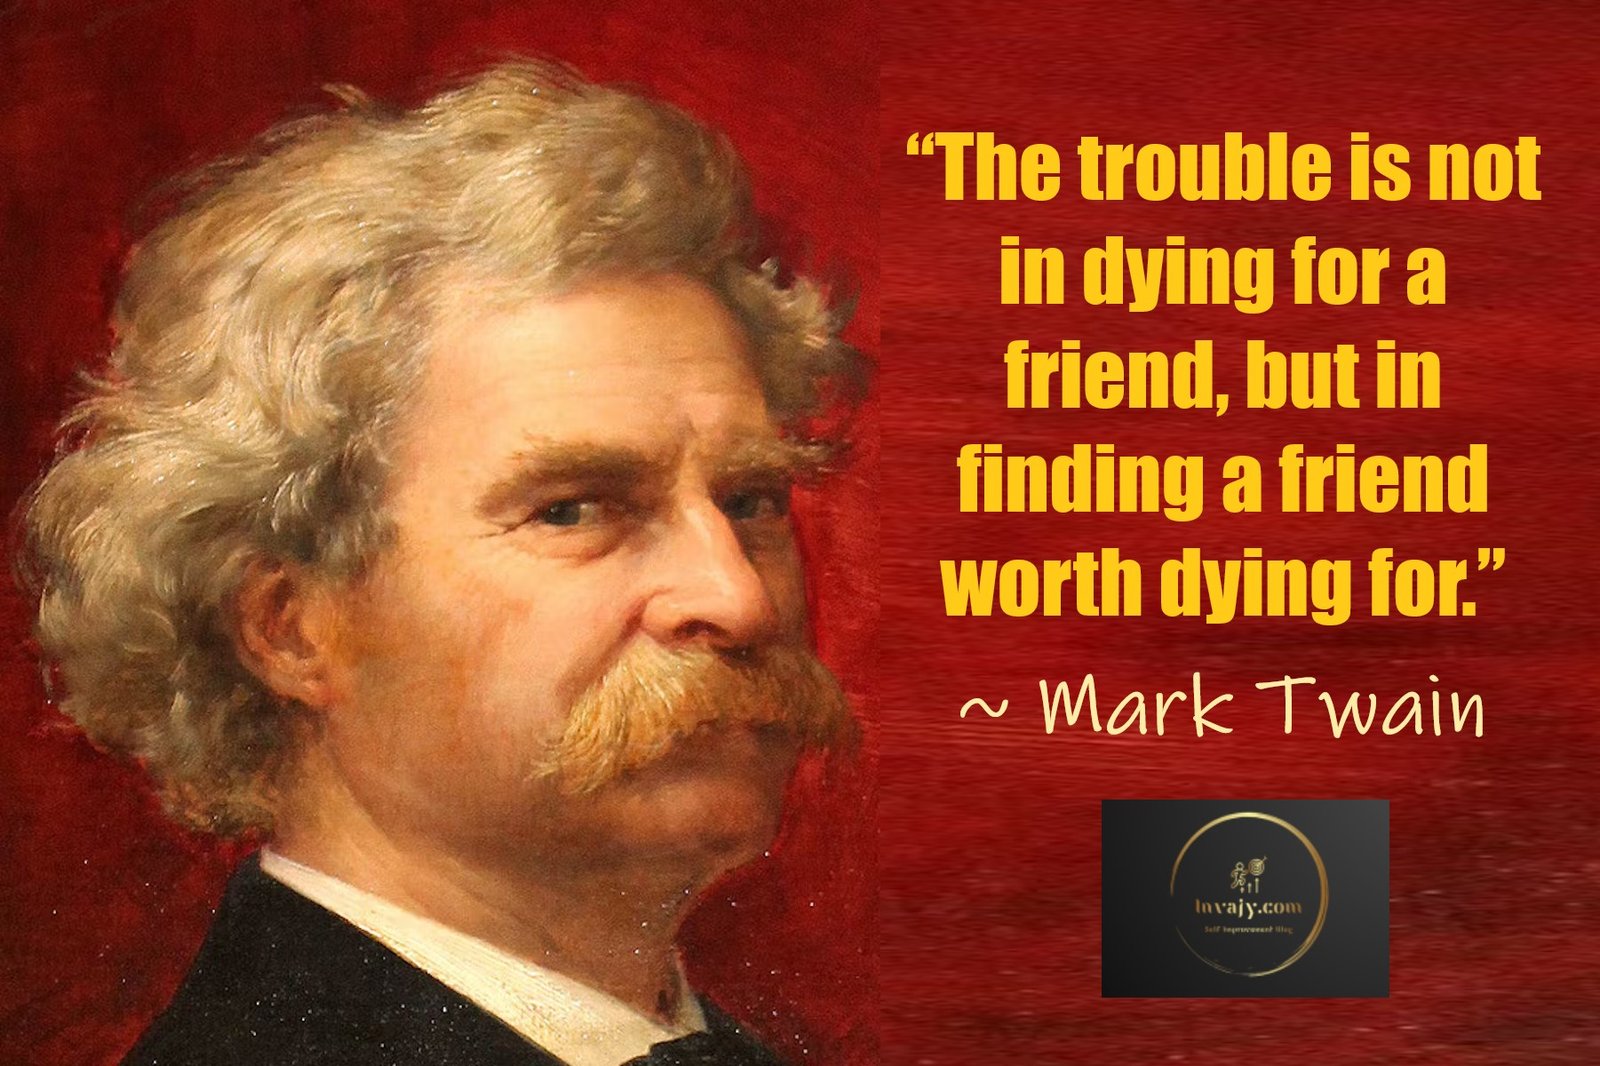 mark twain quotes about love